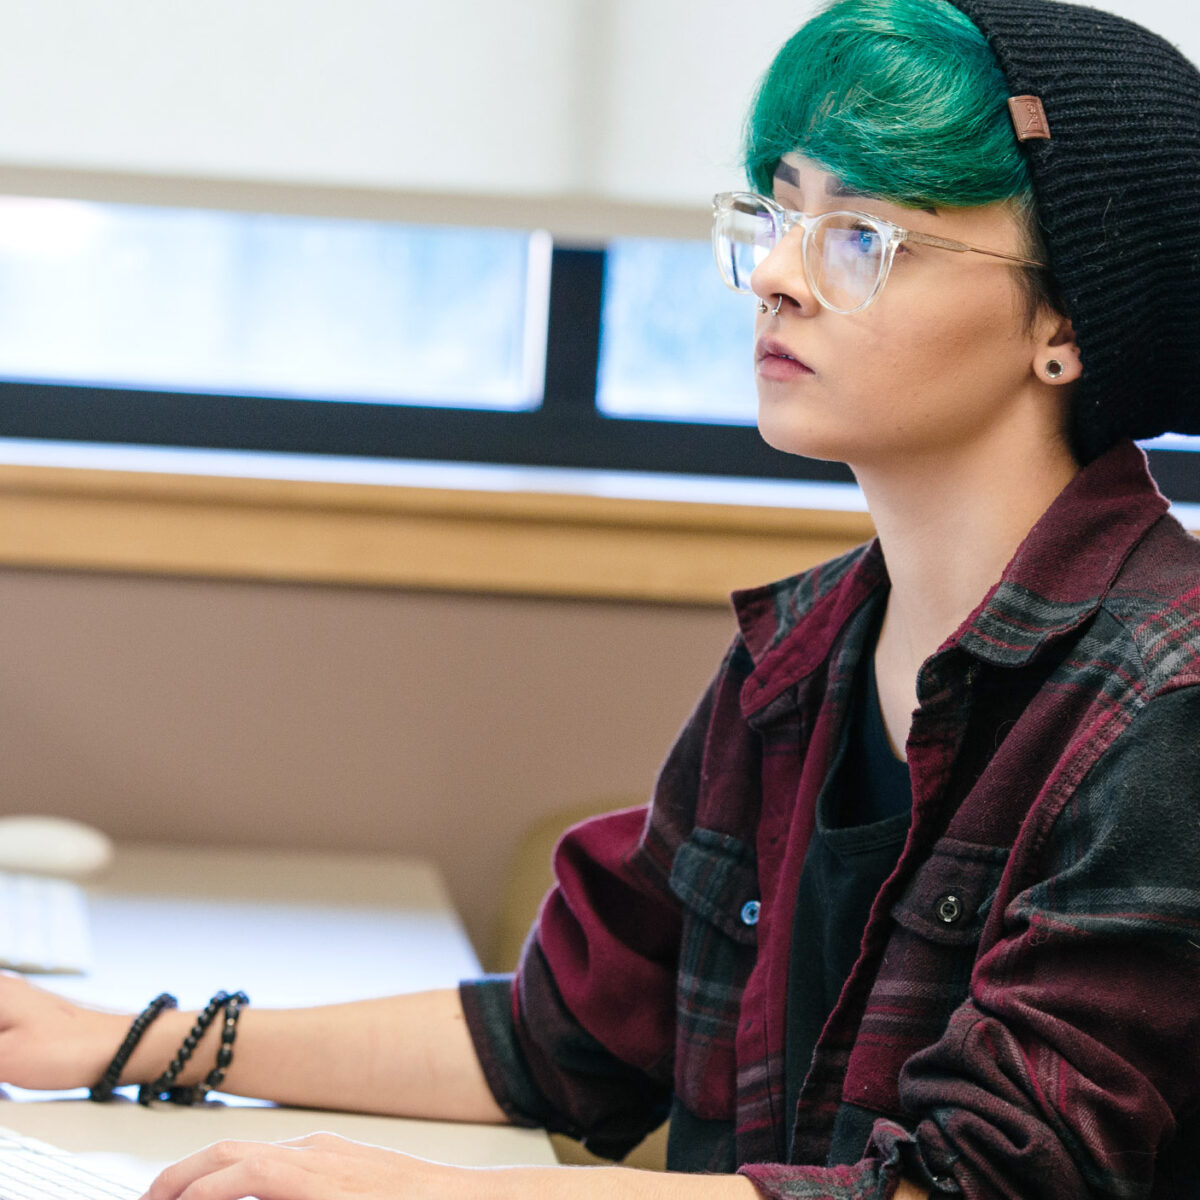 a student with colorful hair works intently at a computer